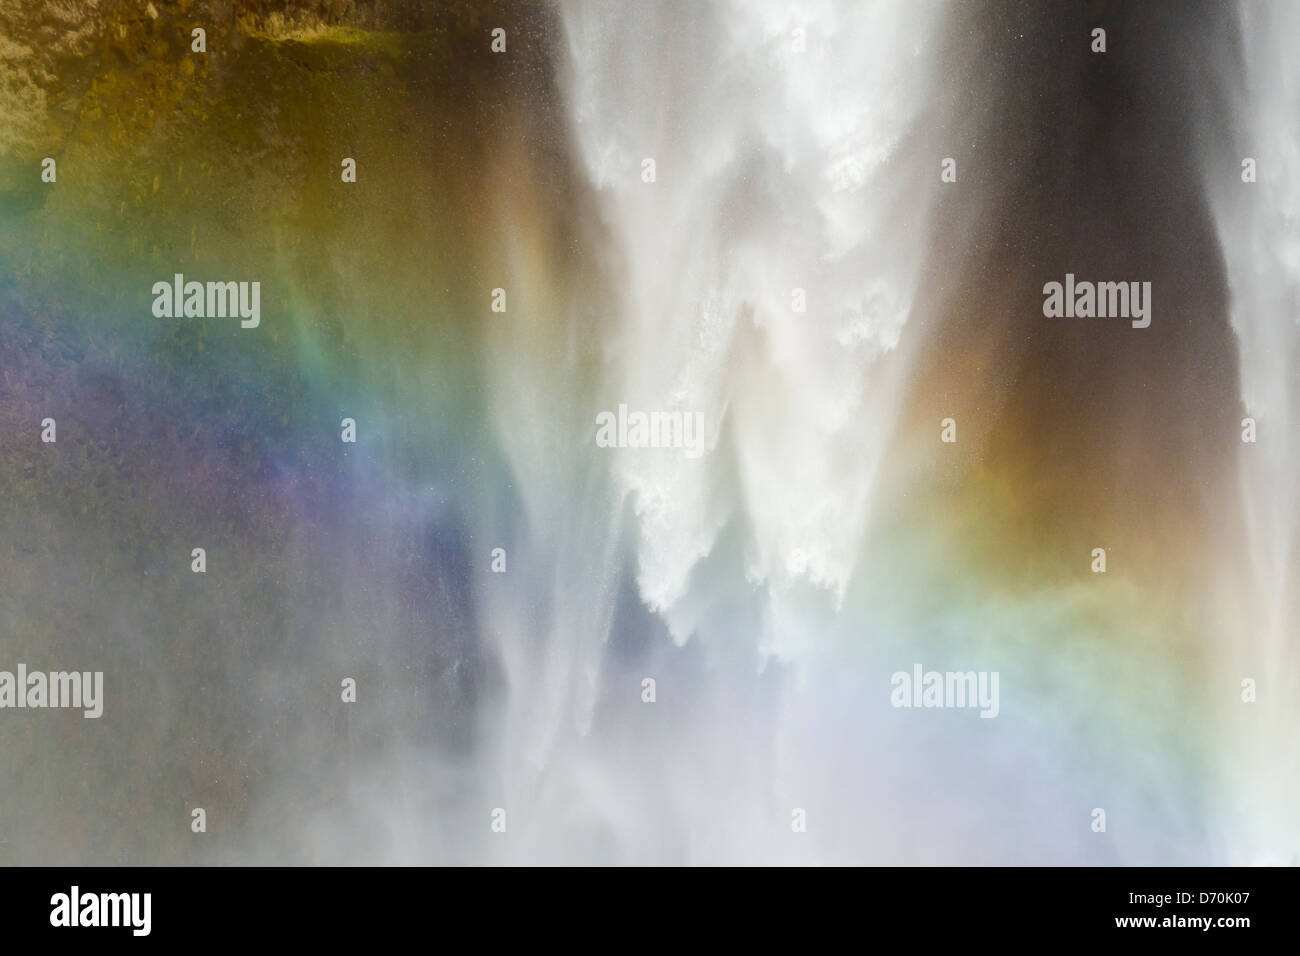 Detail of a primary rainbow showing color spectrum of visible light as droplets of water spray refract sunlight at waterfall Stock Photo